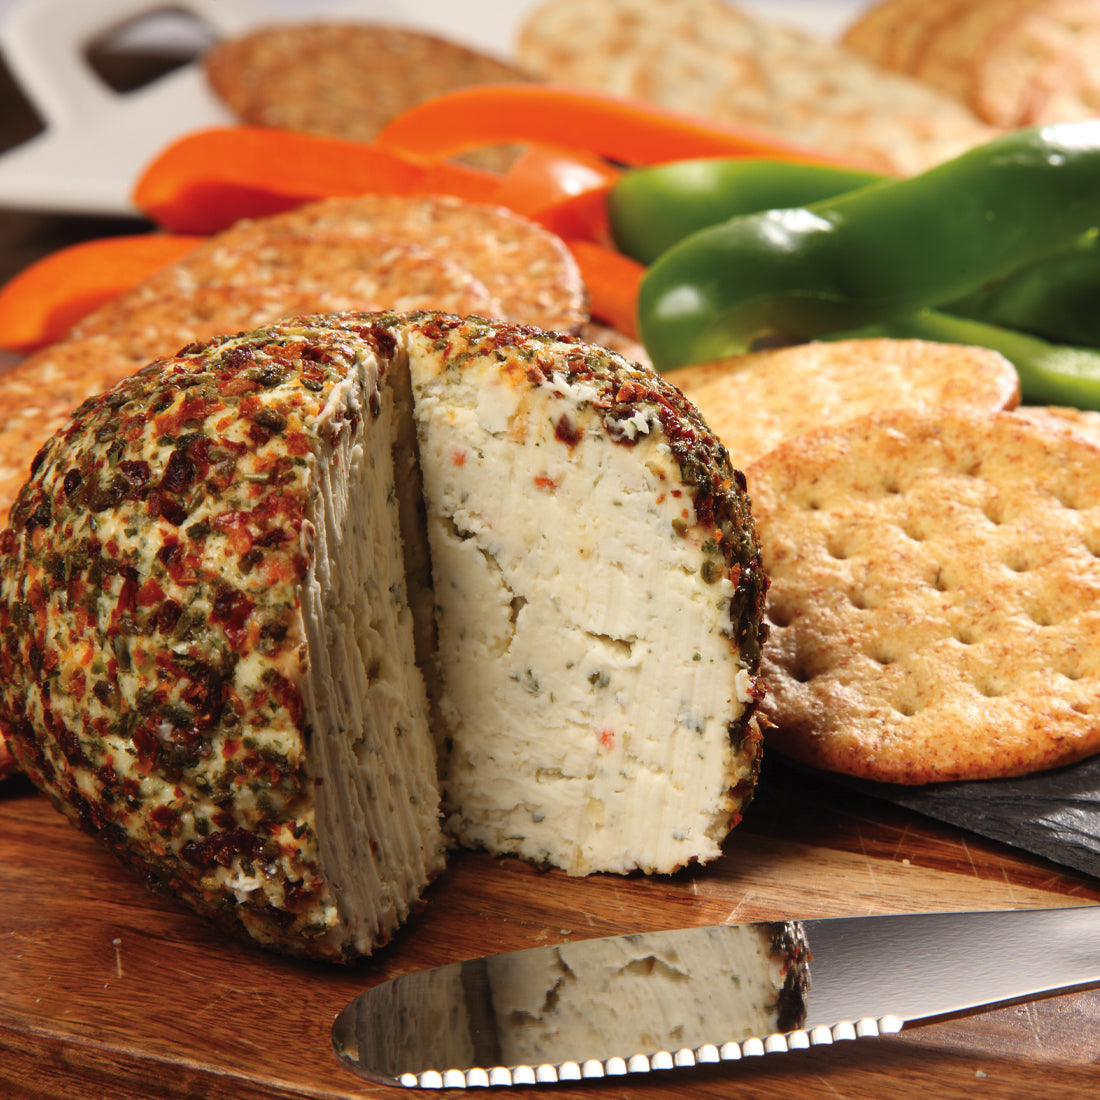 A Garden Vegetable Cheeseball next to crackers and bell pepper slices